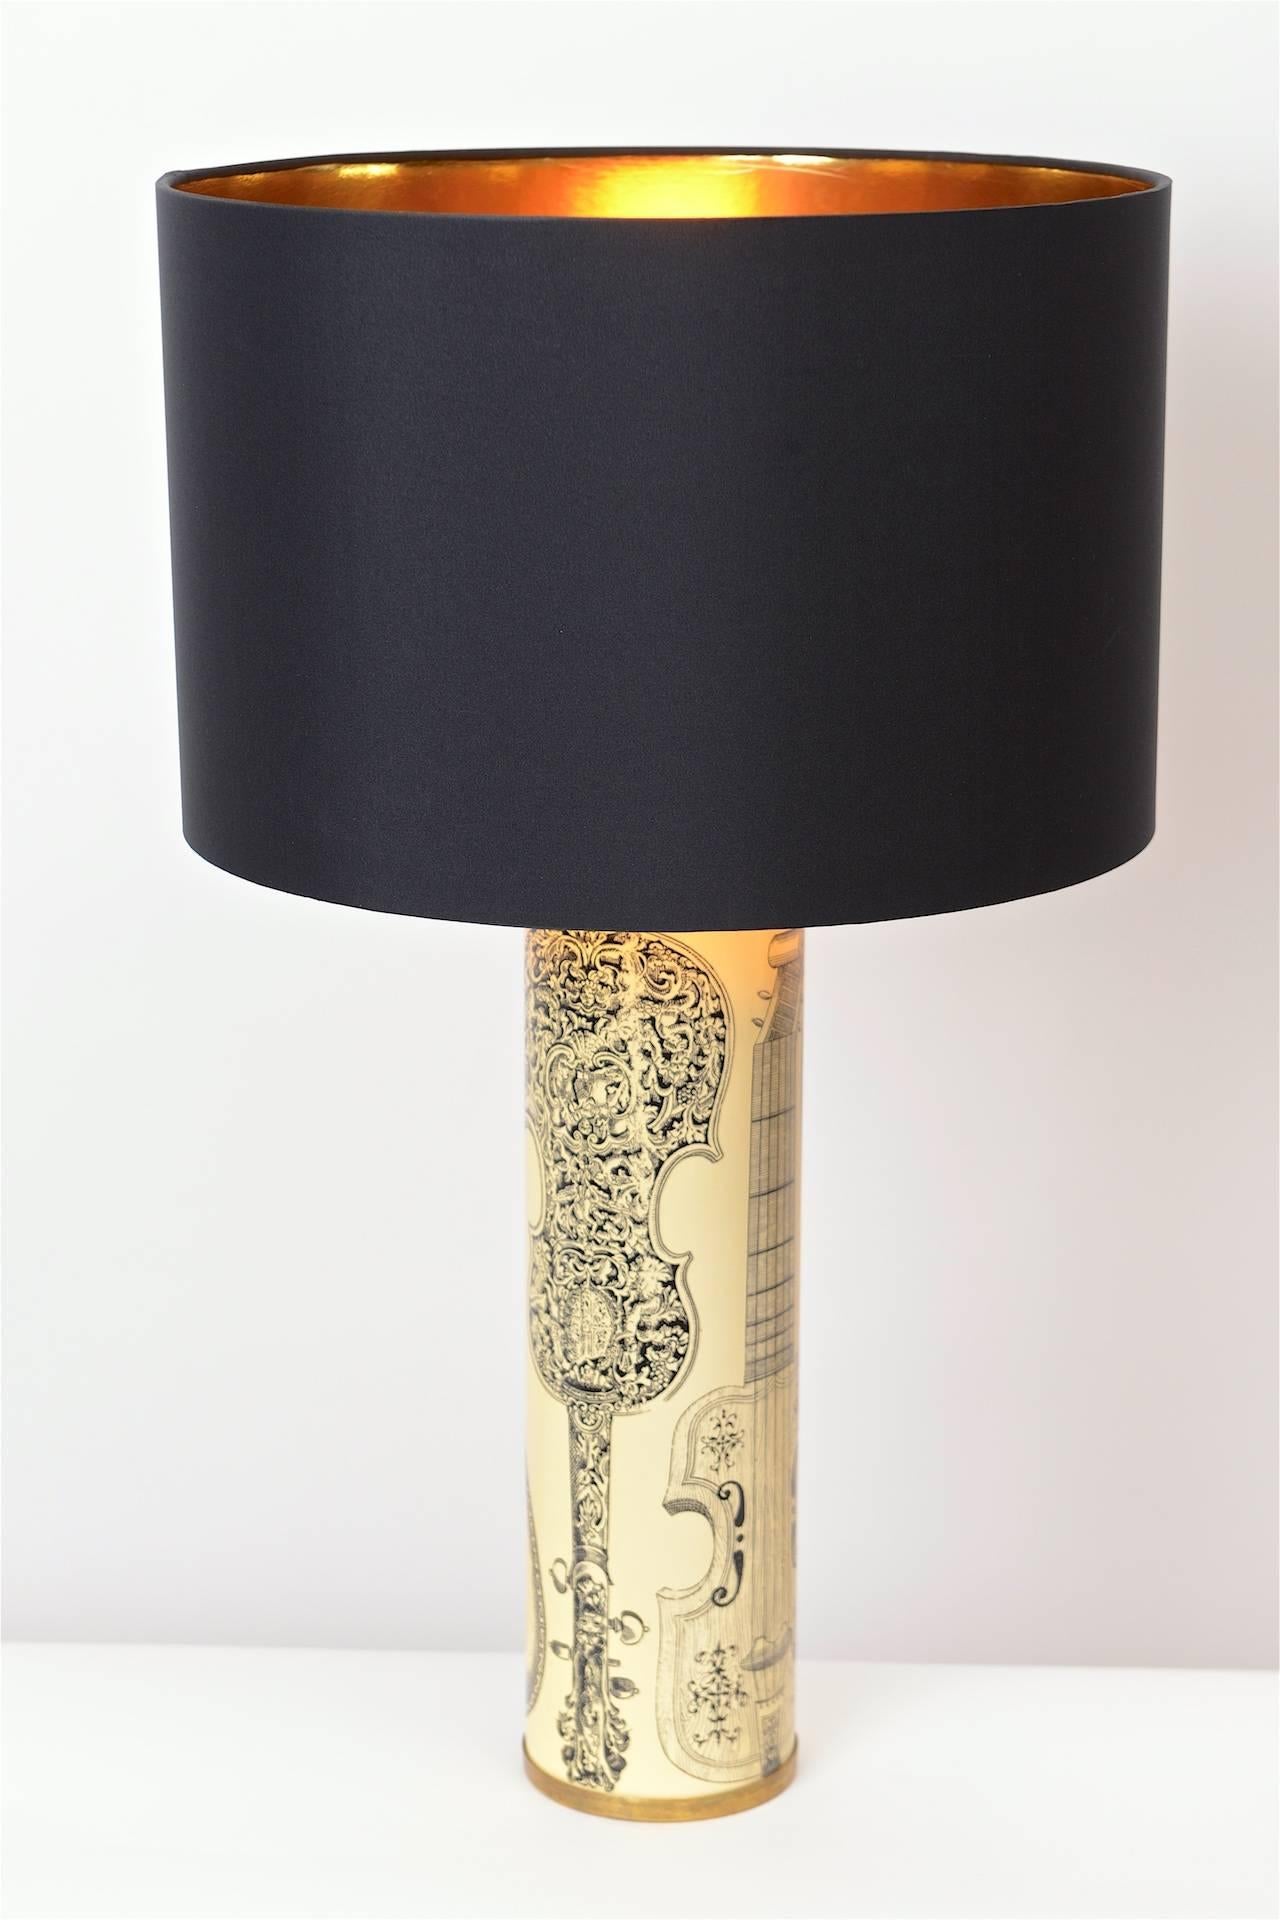 A beautiful, 1950s Italian table lamp by Piero Fornasetti. The cylindrical body of the lamp is decorated with lacquered black transfers of musical instruments on a cream background. The lamp comes complete with a new shade and has been newly